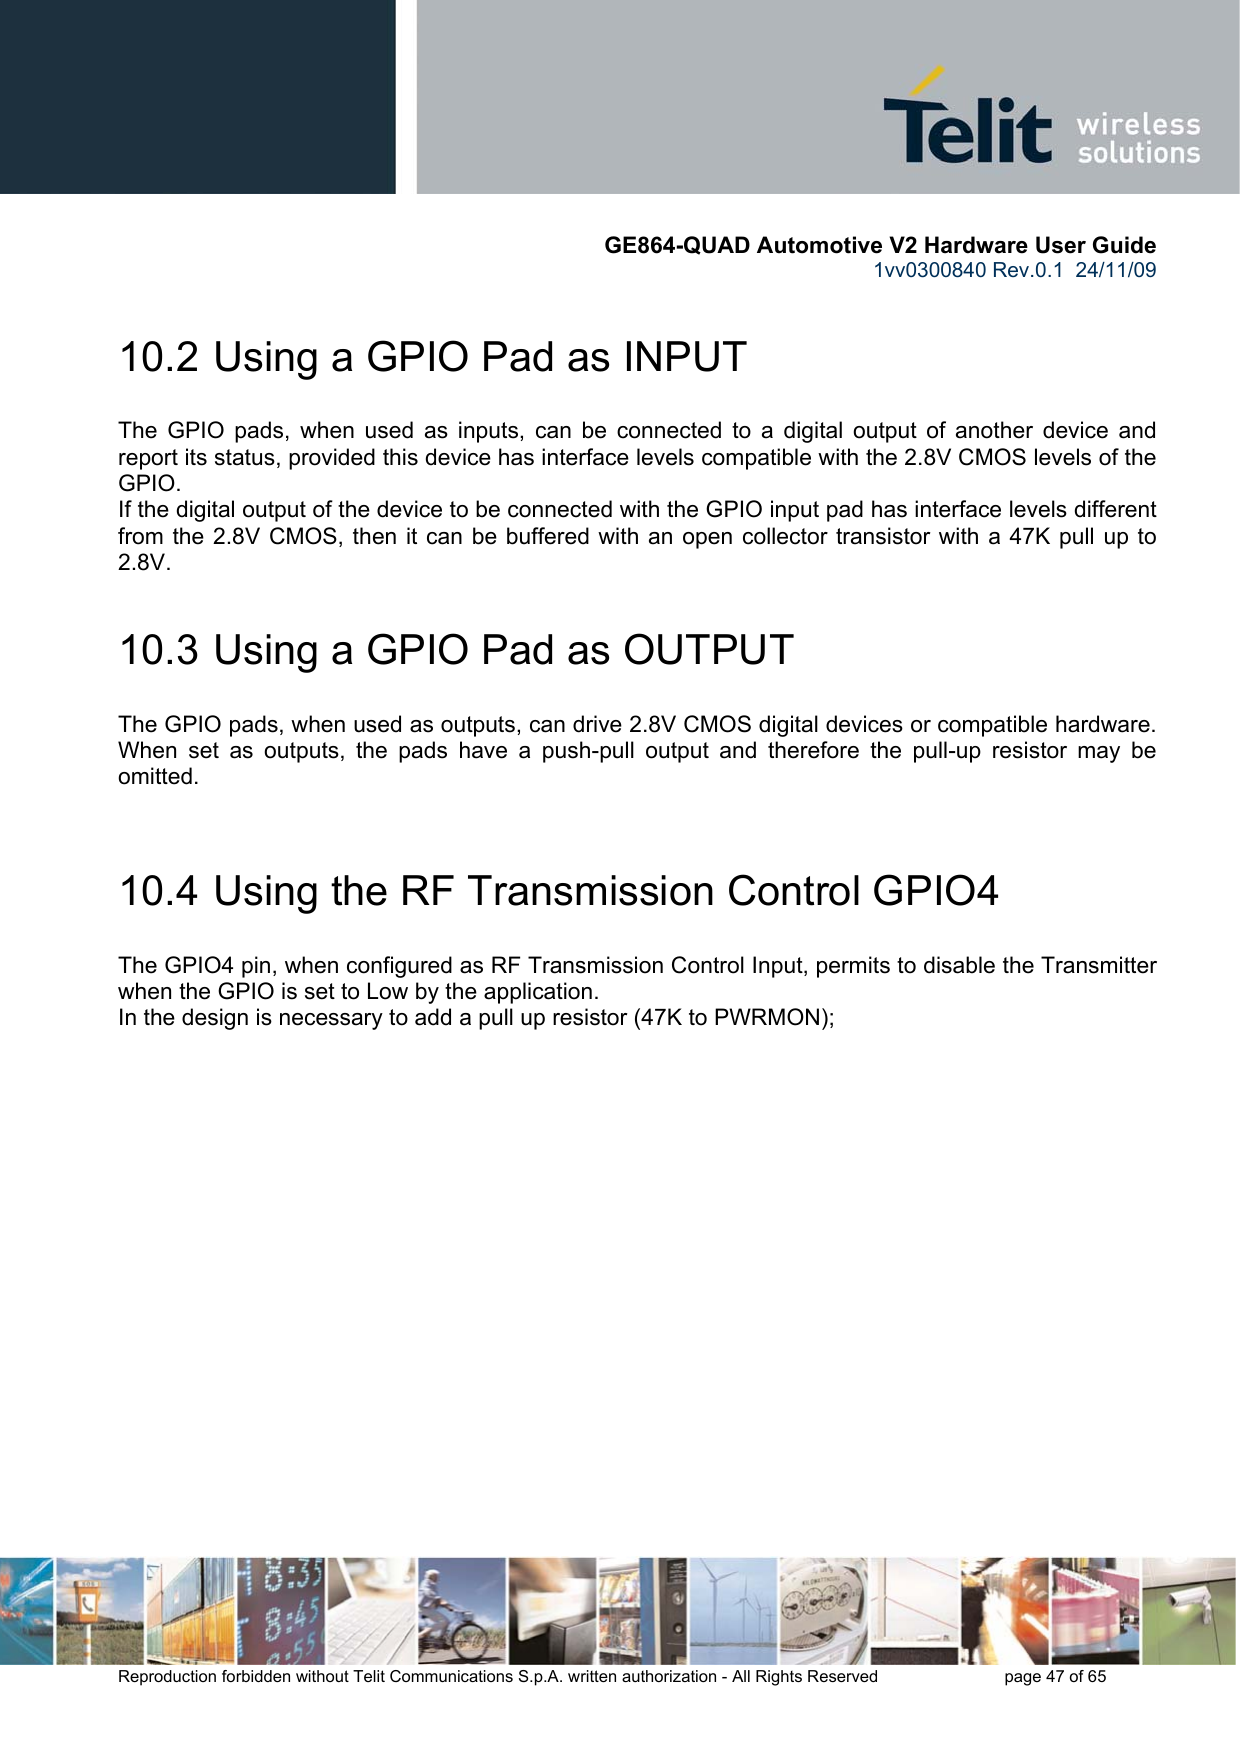       GE864-QUAD Automotive V2 Hardware User Guide 1vv0300840 Rev.0.1  24/11/09      Reproduction forbidden without Telit Communications S.p.A. written authorization - All Rights Reserved    page 47 of 65  10.2  Using a GPIO Pad as INPUT The GPIO pads, when used as inputs, can be connected to a digital output of another device and report its status, provided this device has interface levels compatible with the 2.8V CMOS levels of the GPIO.  If the digital output of the device to be connected with the GPIO input pad has interface levels different from the 2.8V CMOS, then it can be buffered with an open collector transistor with a 47K pull up to 2.8V. 10.3  Using a GPIO Pad as OUTPUT The GPIO pads, when used as outputs, can drive 2.8V CMOS digital devices or compatible hardware. When set as outputs, the pads have a push-pull output and therefore the pull-up resistor may be omitted.  10.4  Using the RF Transmission Control GPIO4 The GPIO4 pin, when configured as RF Transmission Control Input, permits to disable the Transmitter when the GPIO is set to Low by the application. In the design is necessary to add a pull up resistor (47K to PWRMON);     